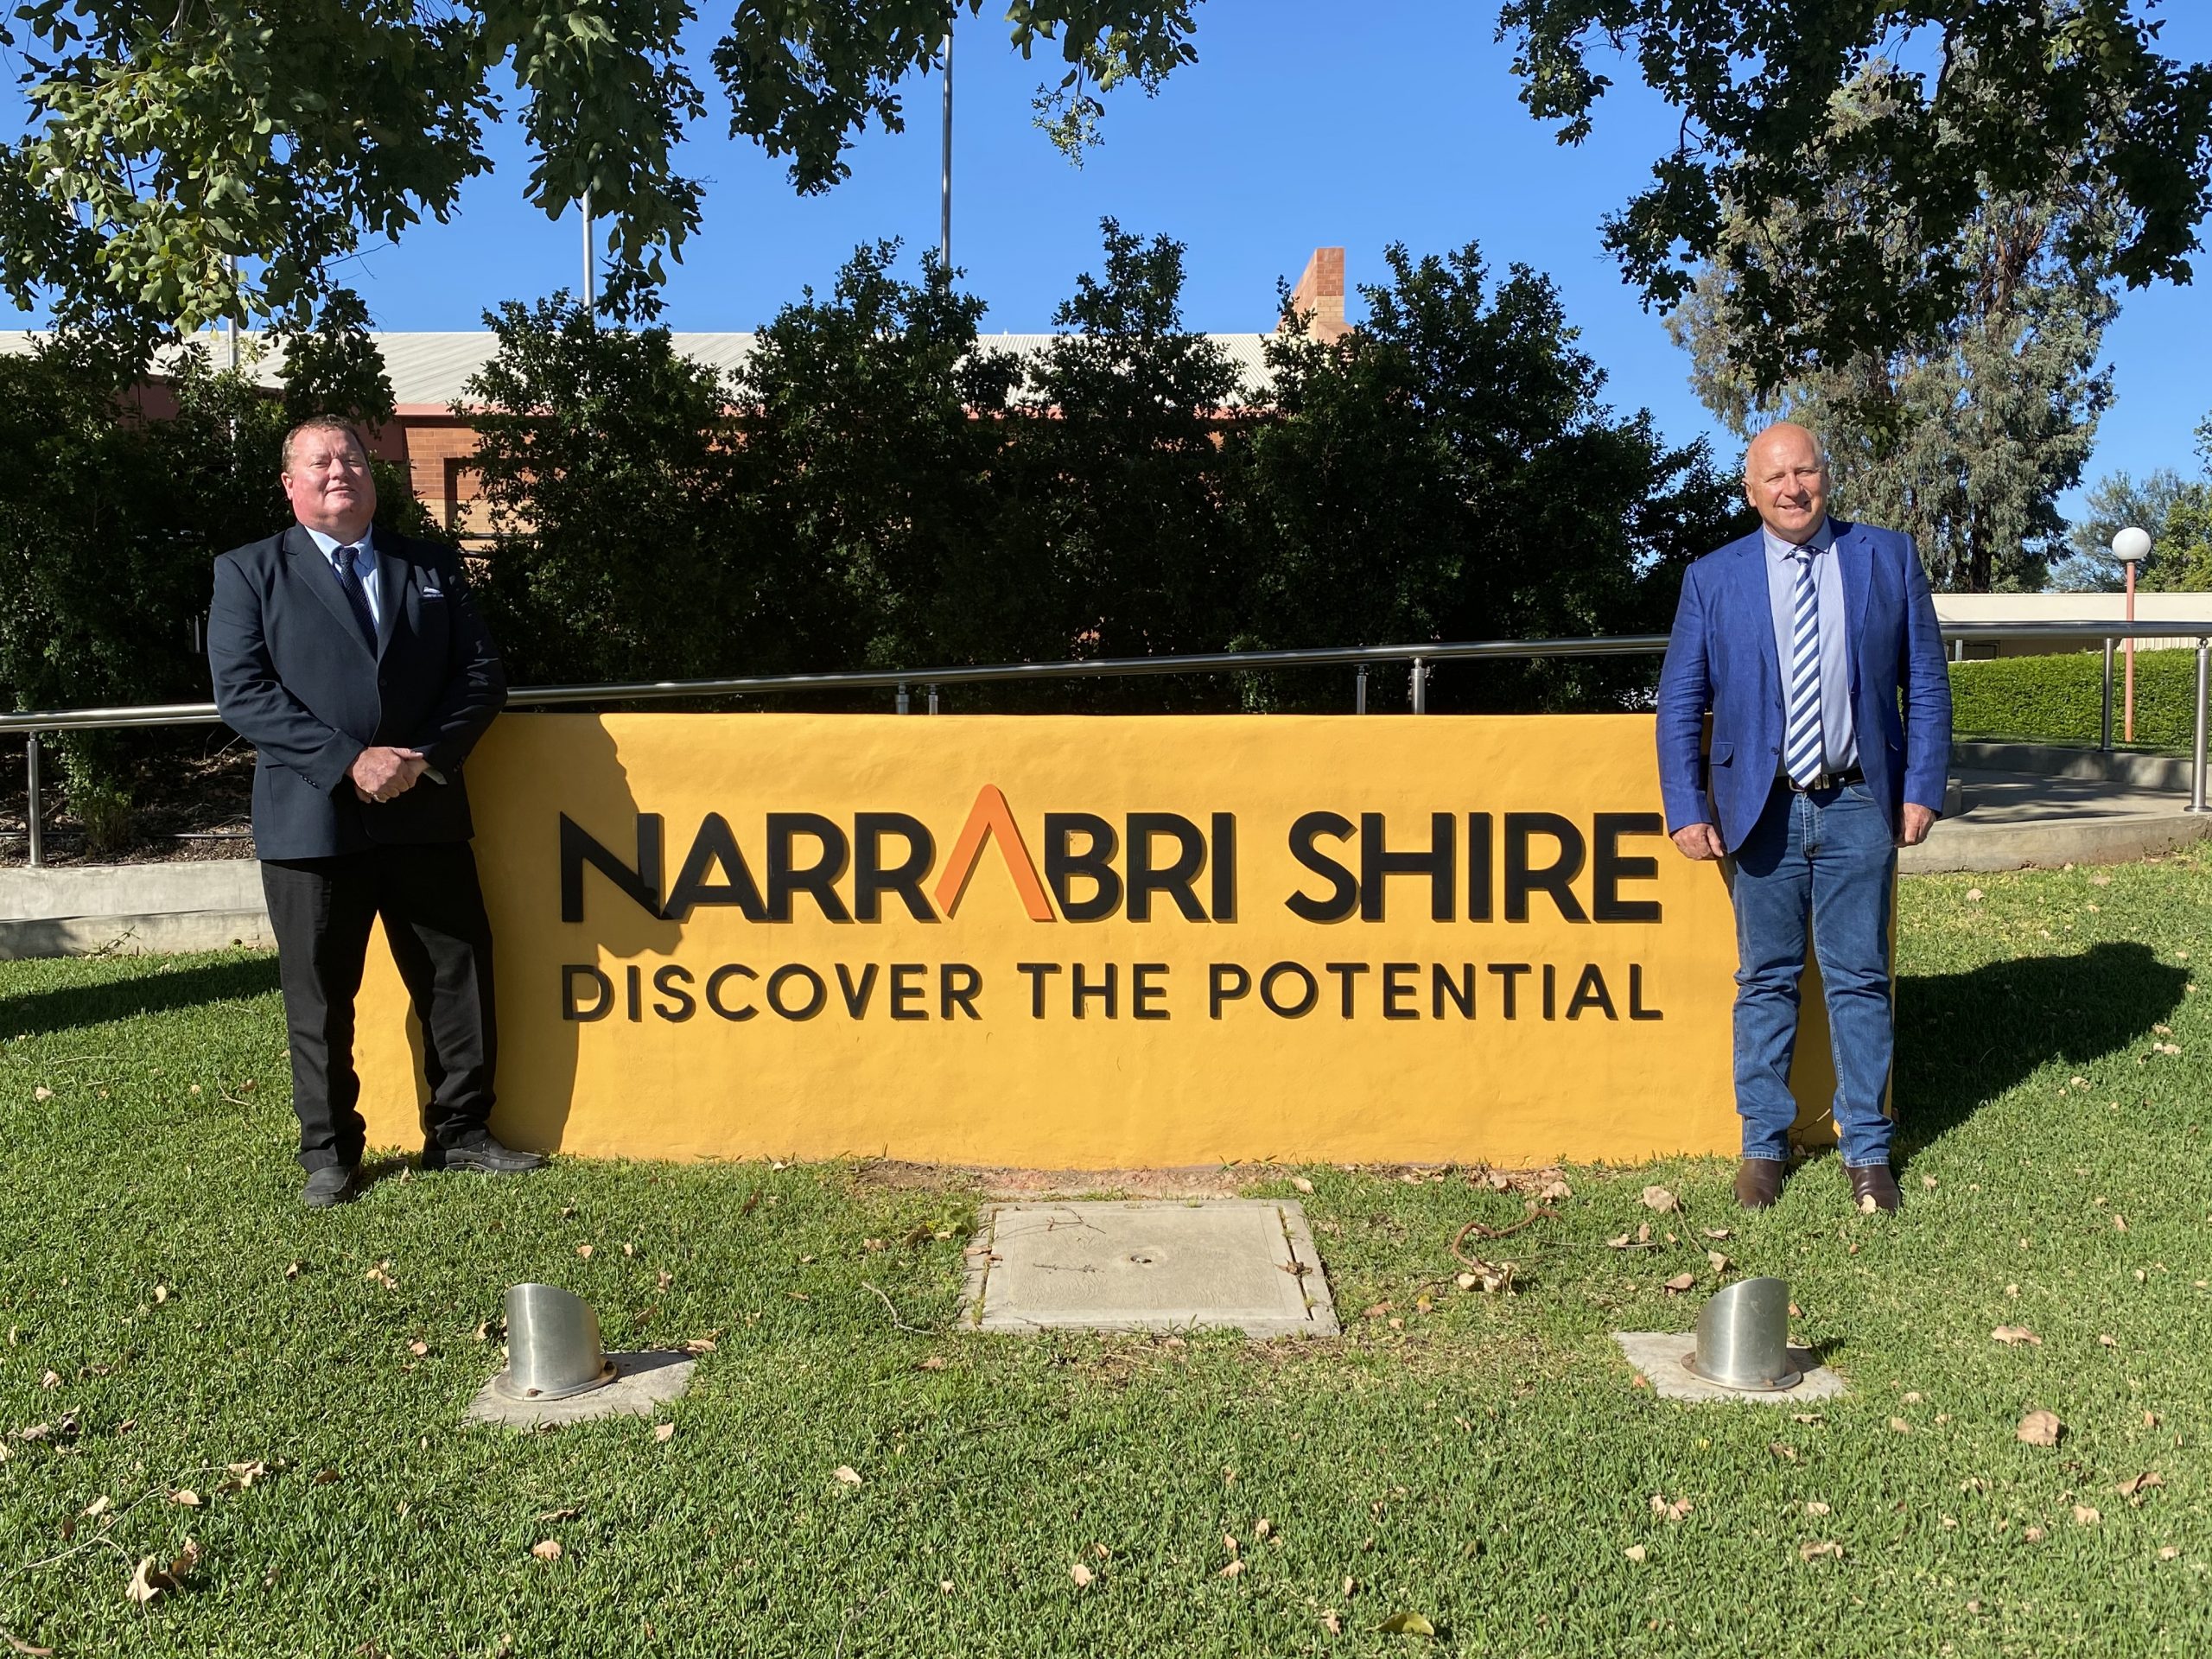 New leaders elected for Narrabri Shire